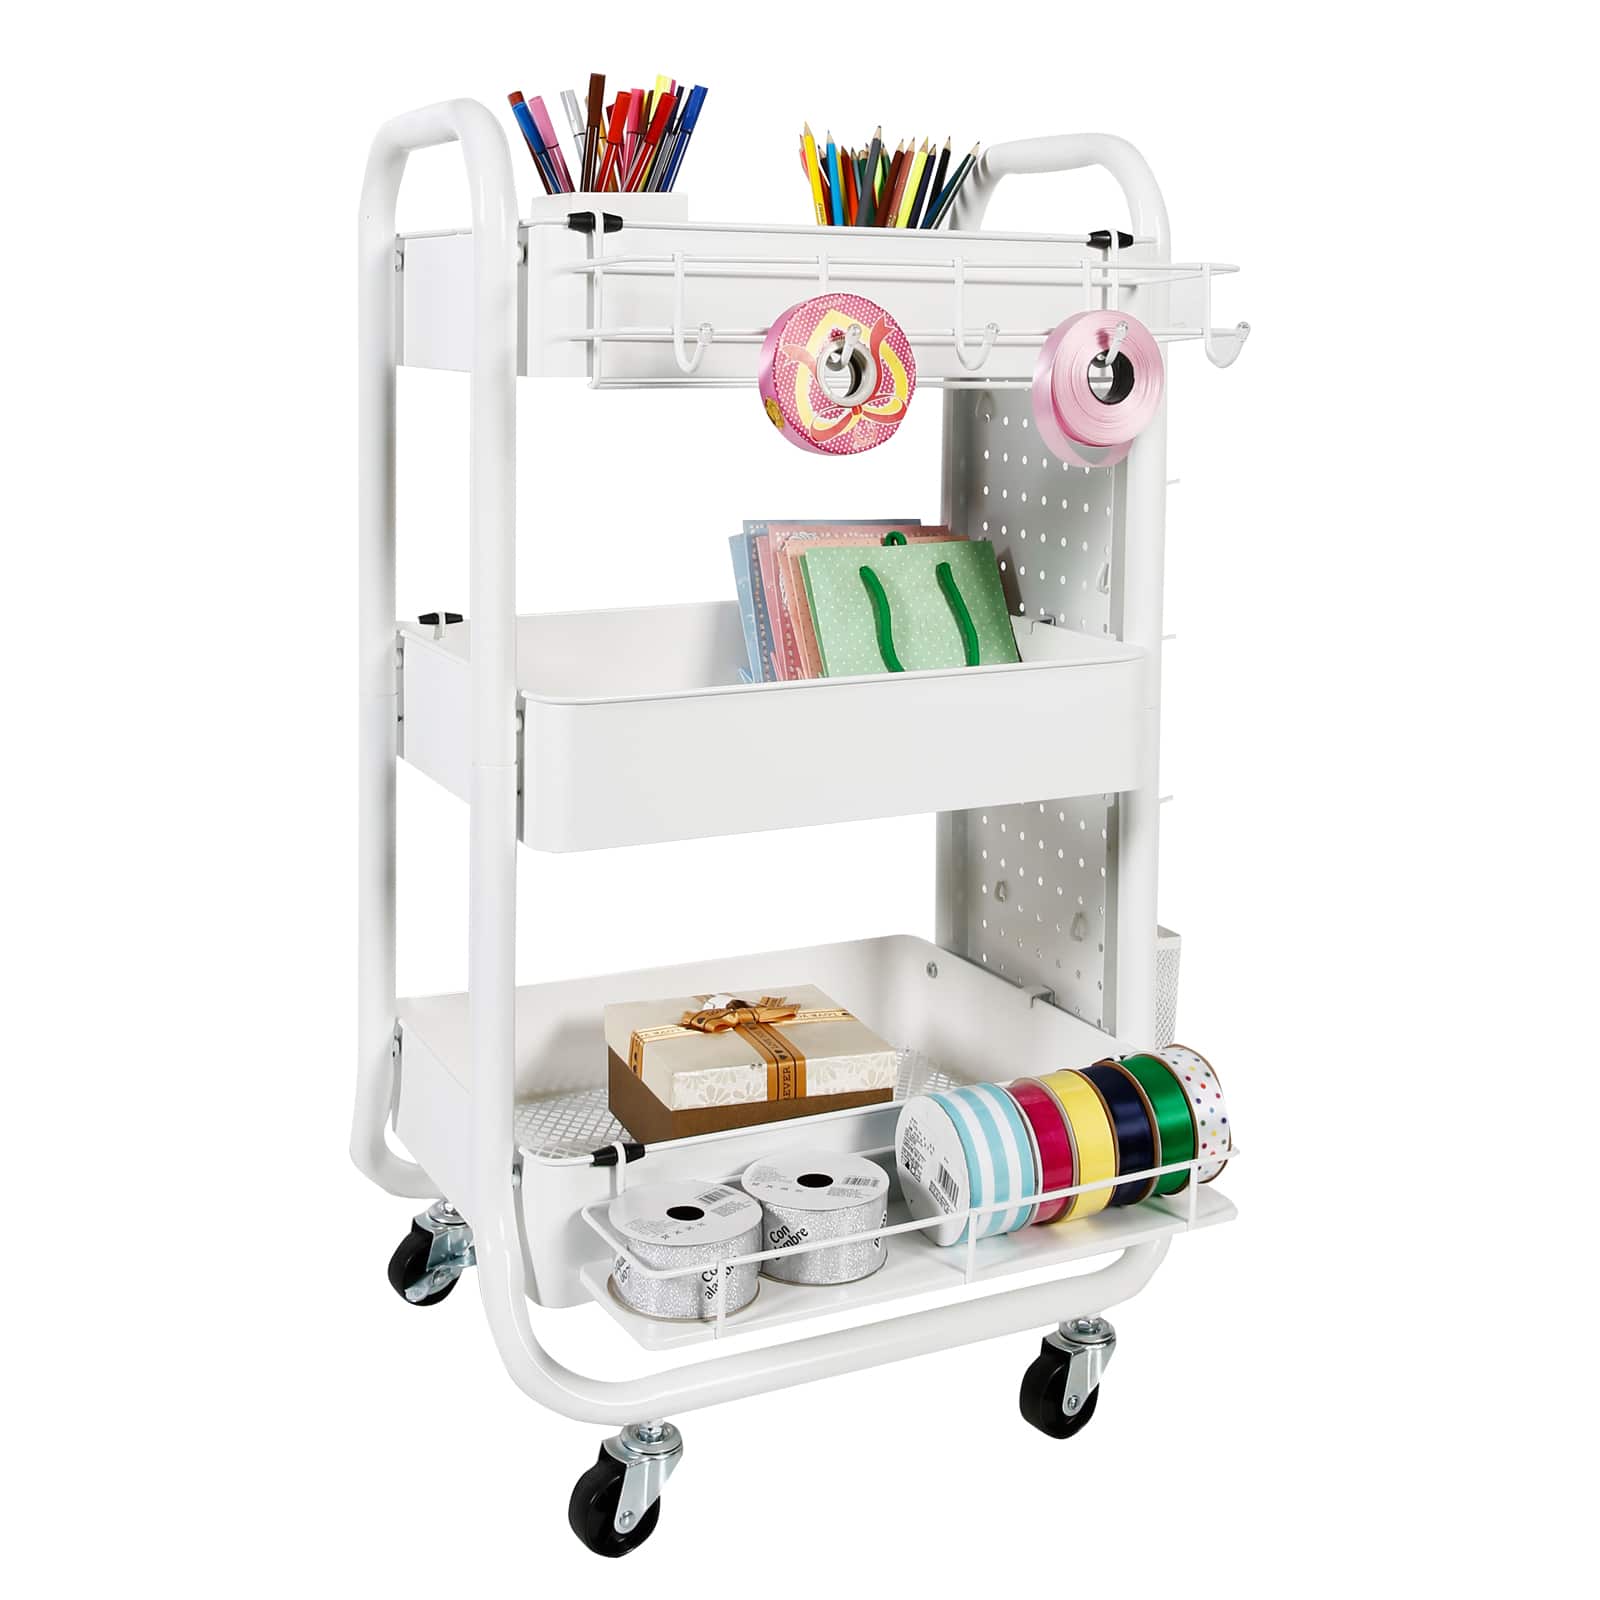 Gramercy Rolling Cart by Simply Tidy™ | Michaels